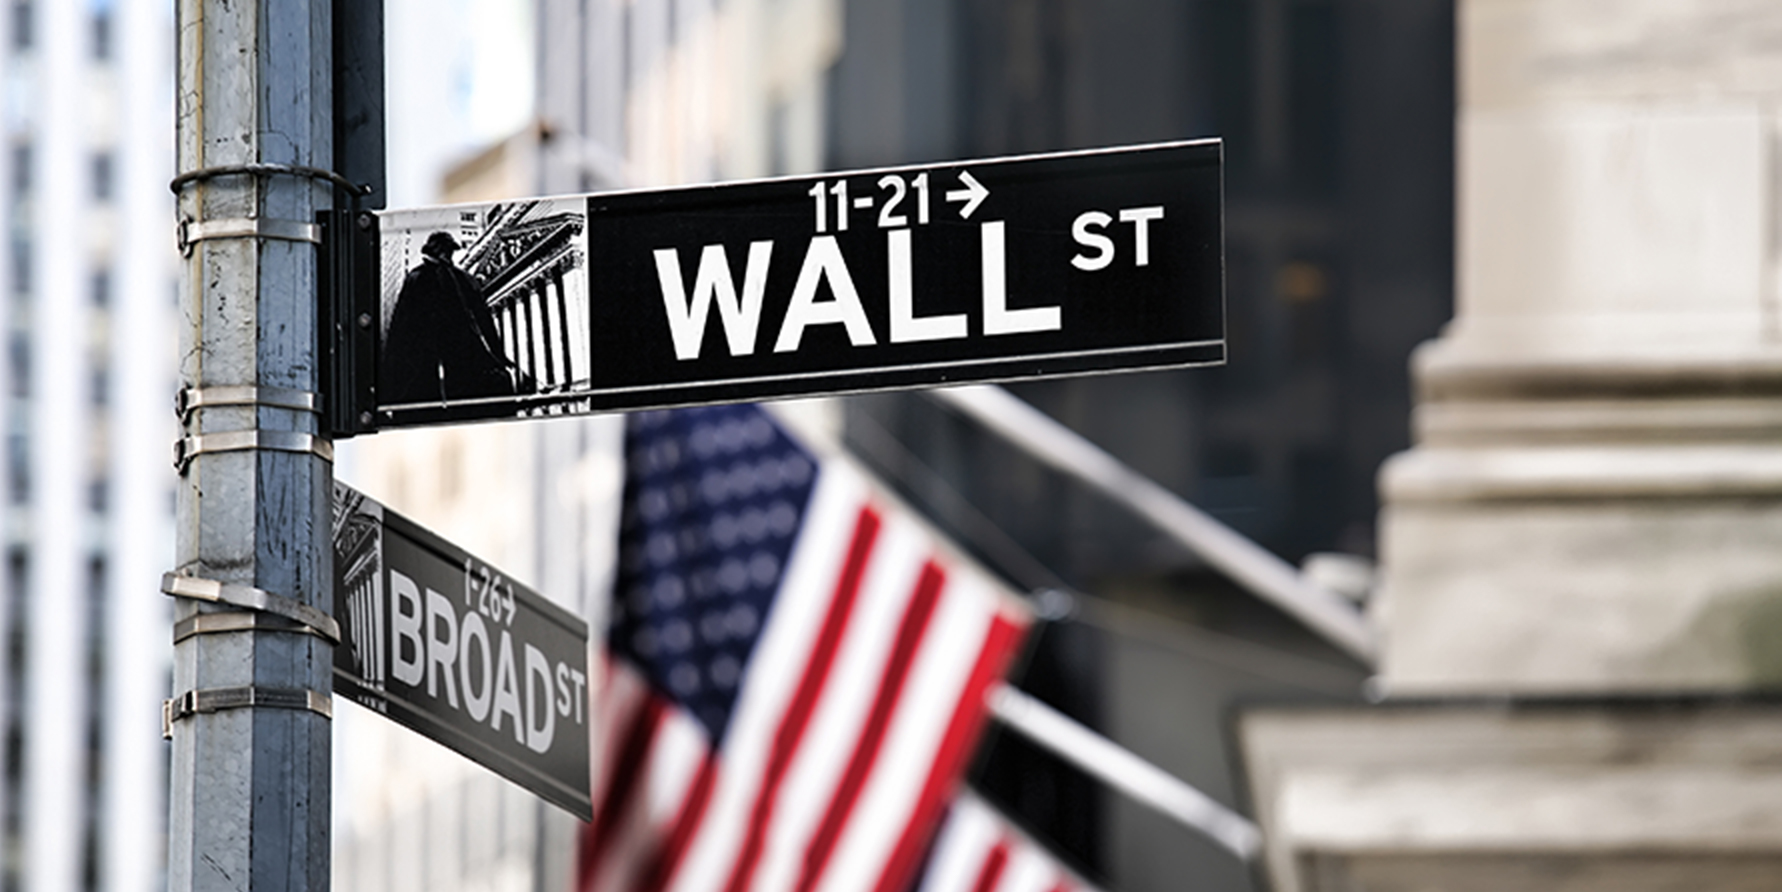 Photograph of Wall Street sign in New York City